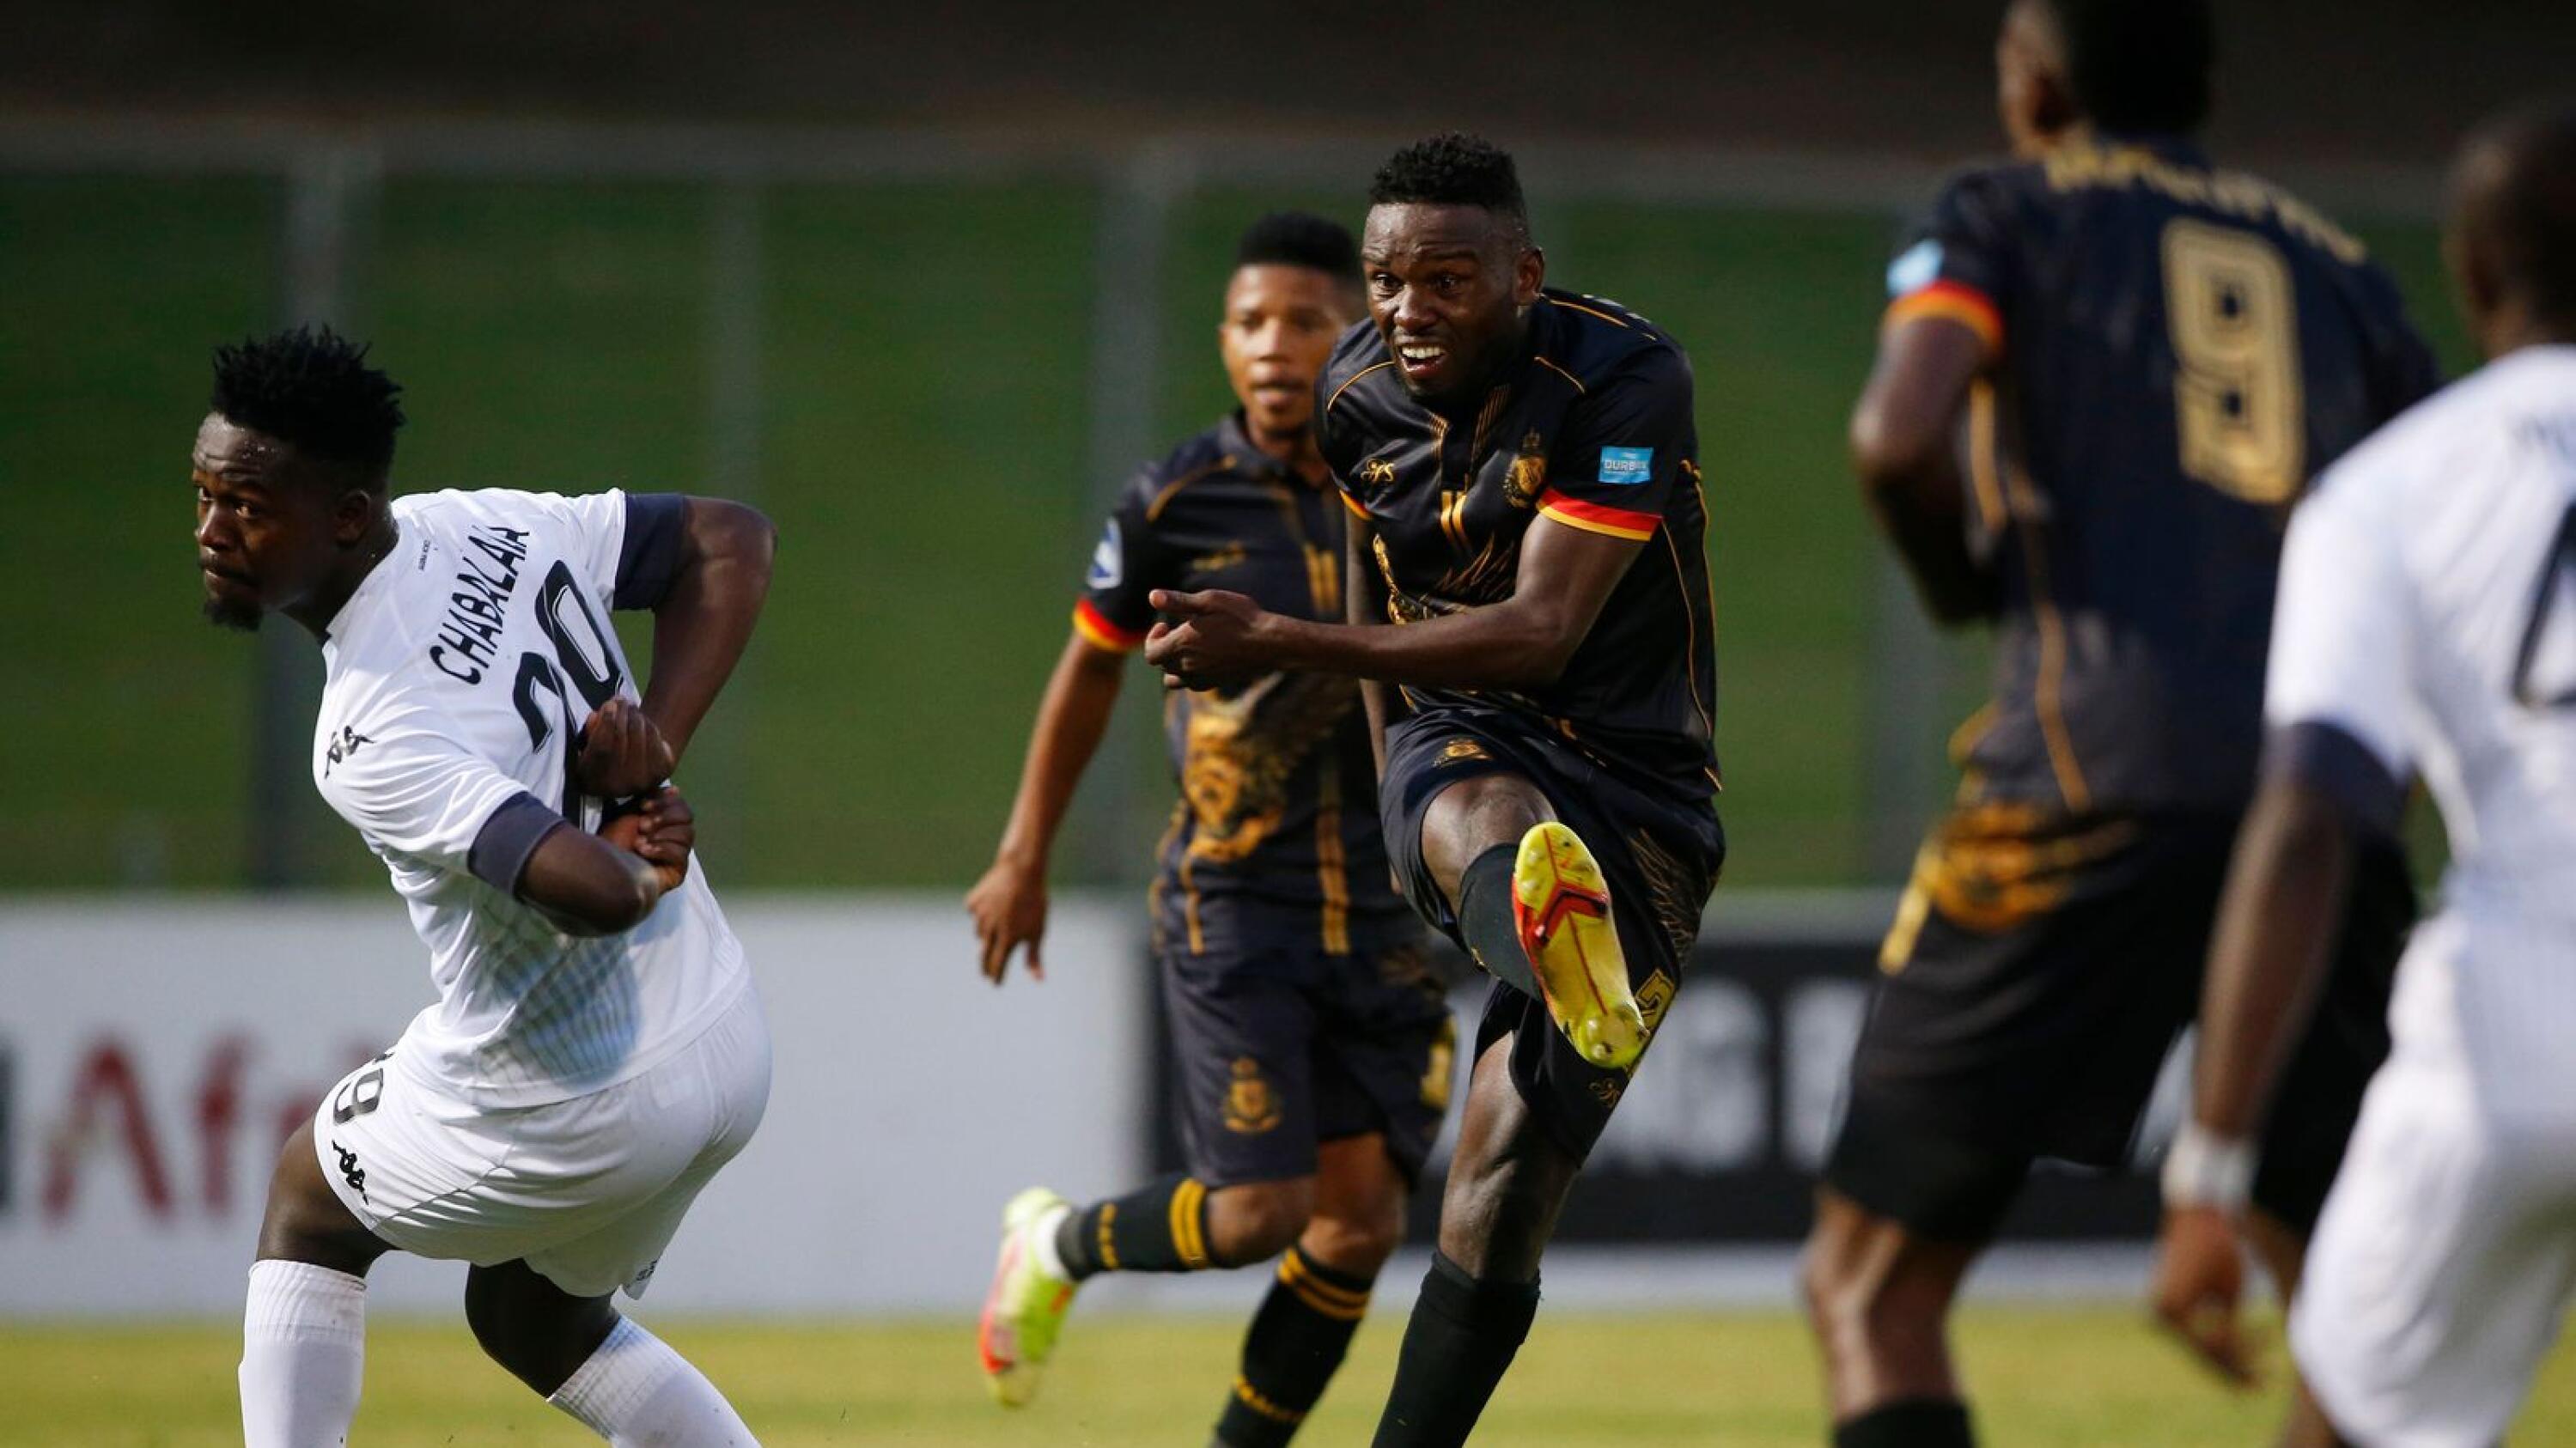 Victor Lestsoalo of Royal AM scores the only goal of the game during the DStv Premiership match against Sekhukhune United at Chatsworth Stadium in Durban on Tuesday